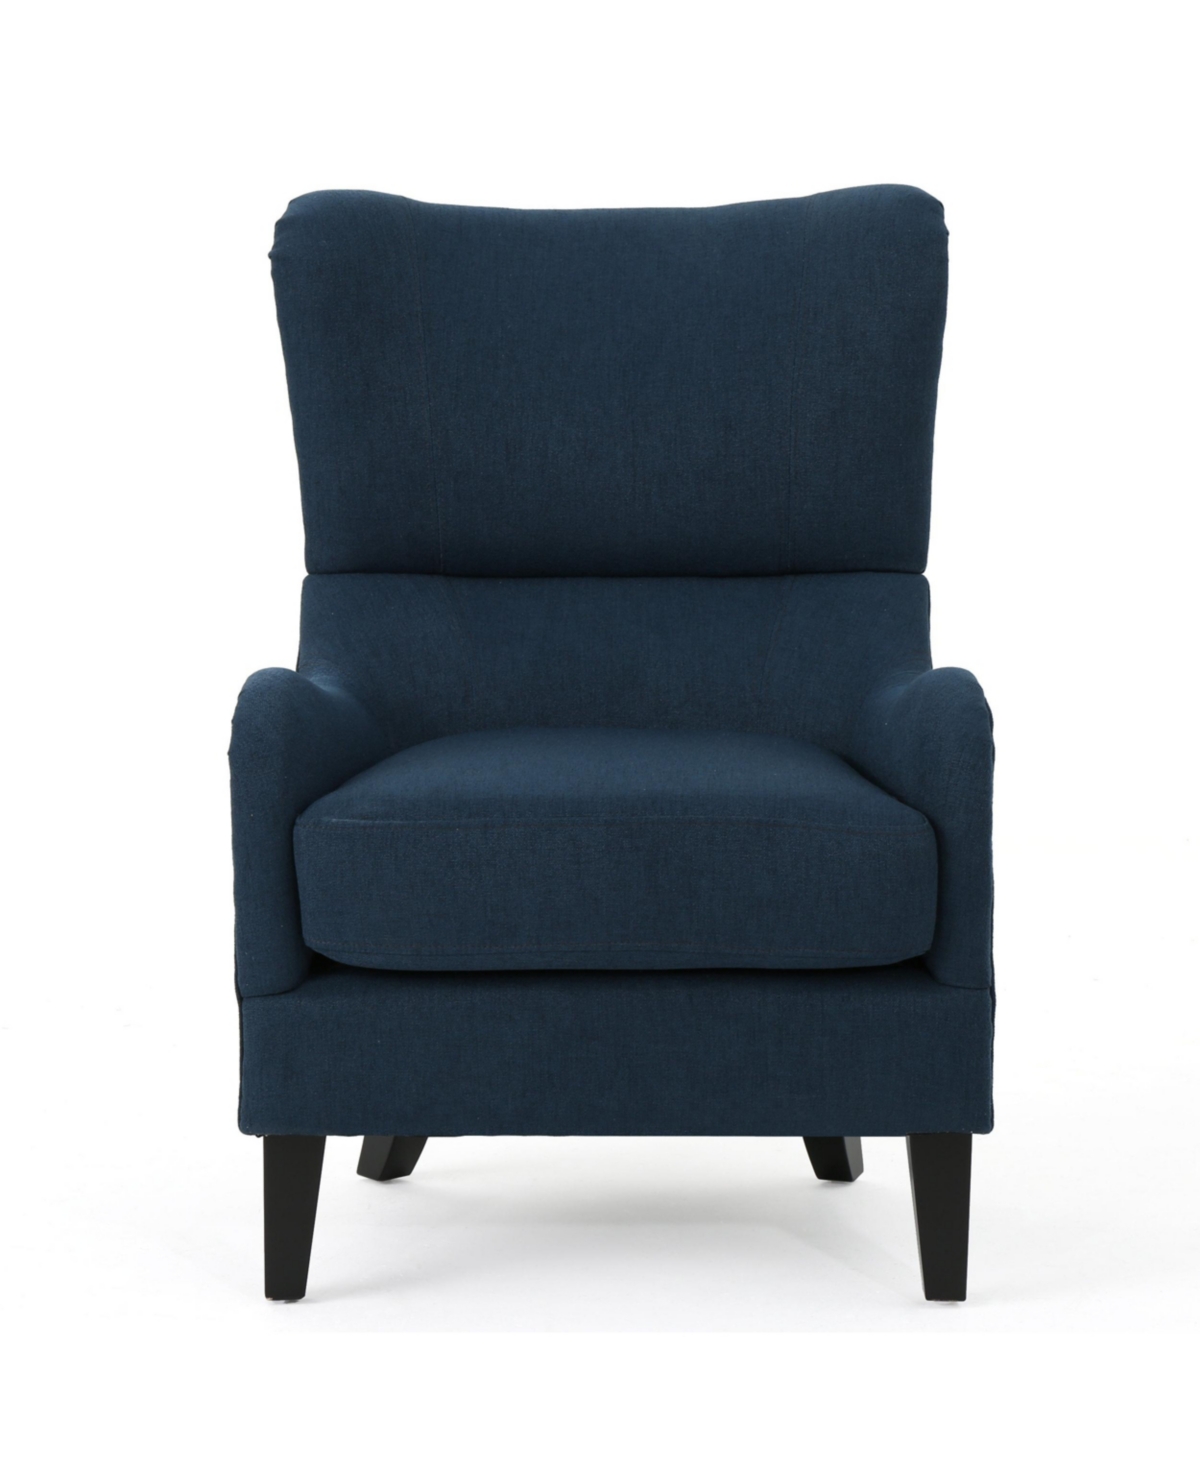 Noble House Quentin Sofa Chair In Navy Blue